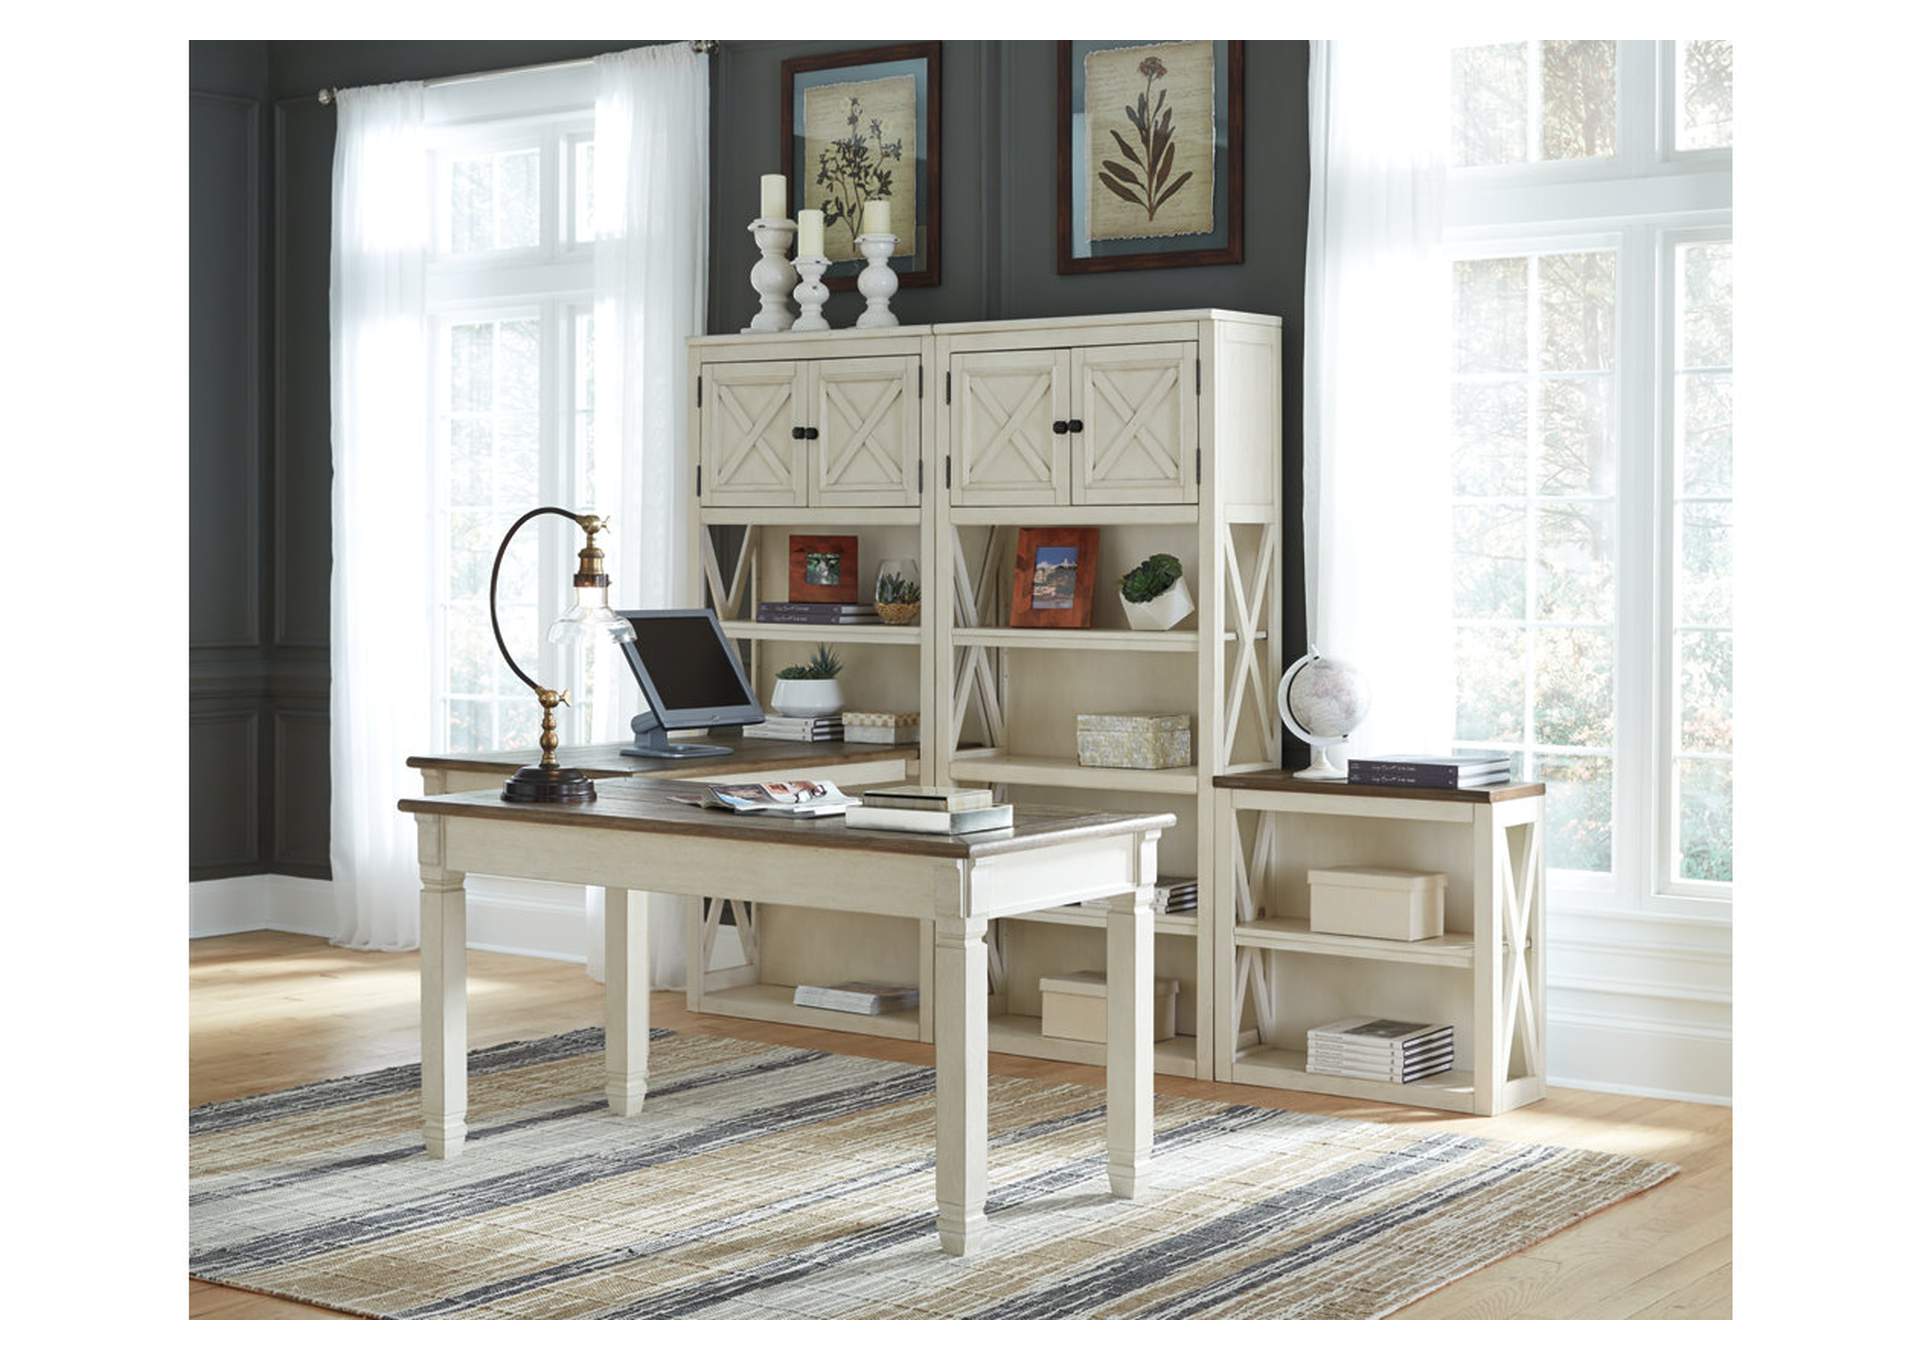 Bolanburg Two-Tone Home Office Desk,Direct To Consumer Express